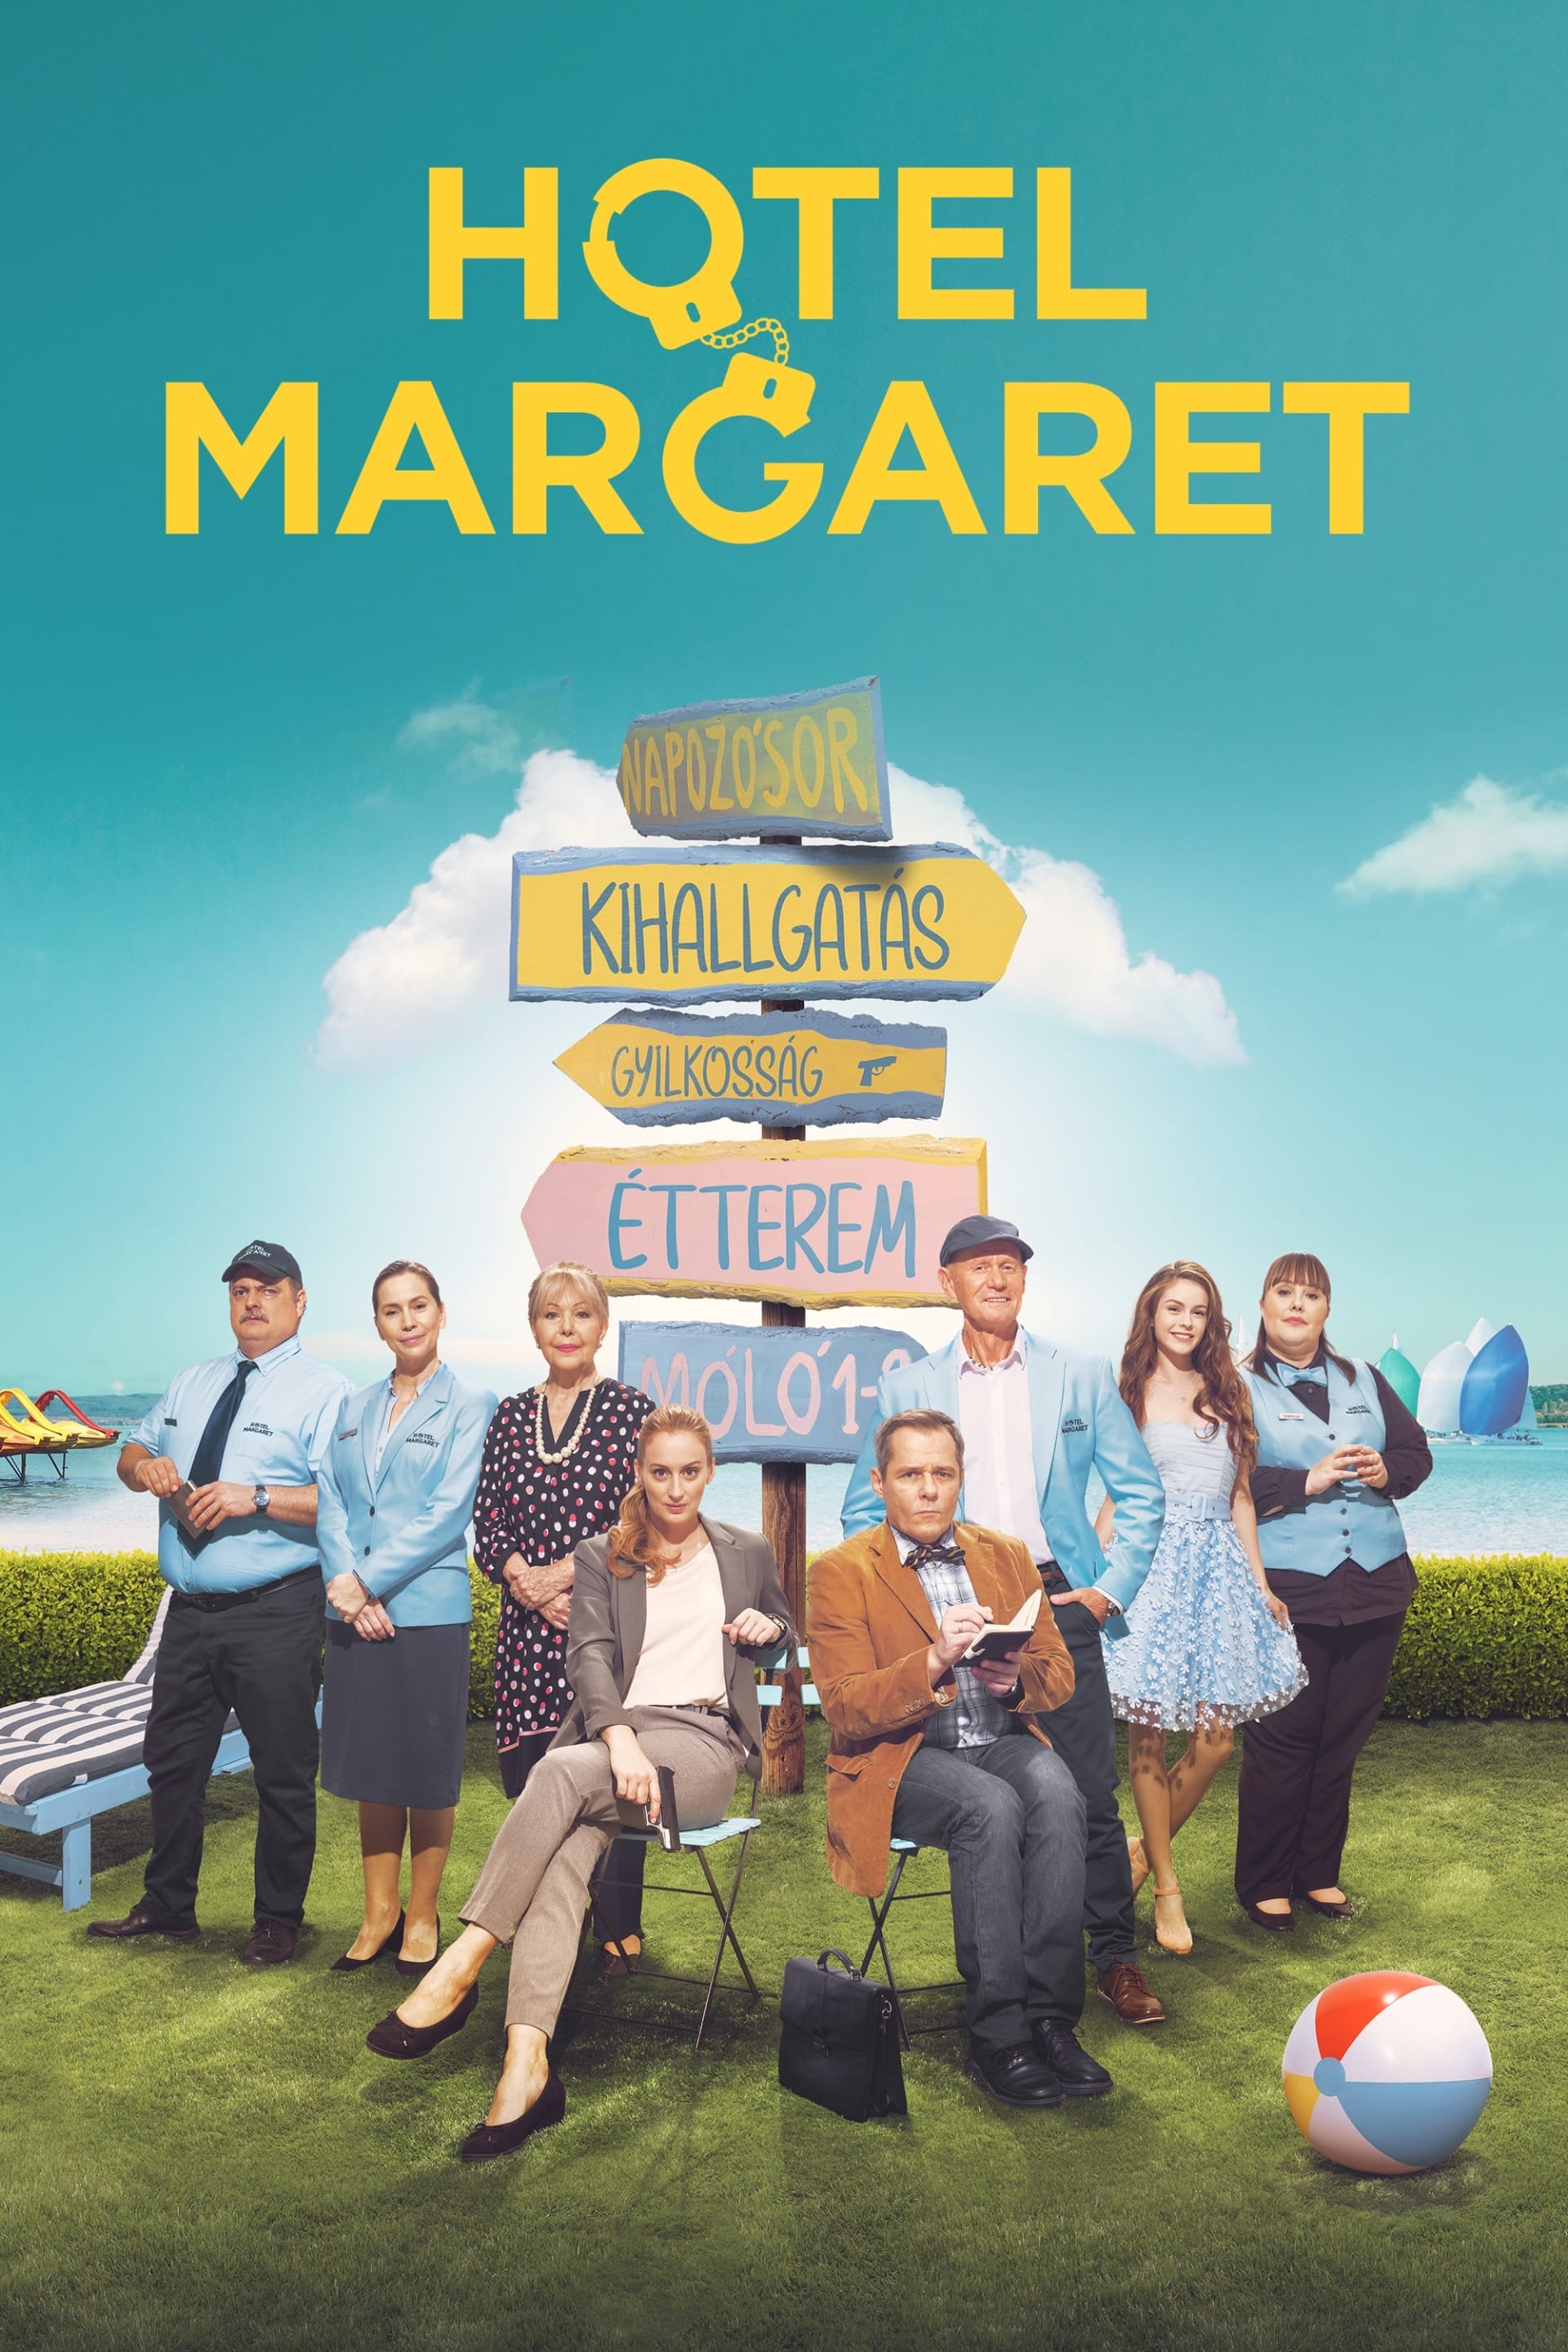 Hotel Margaret TV Shows About Hotel